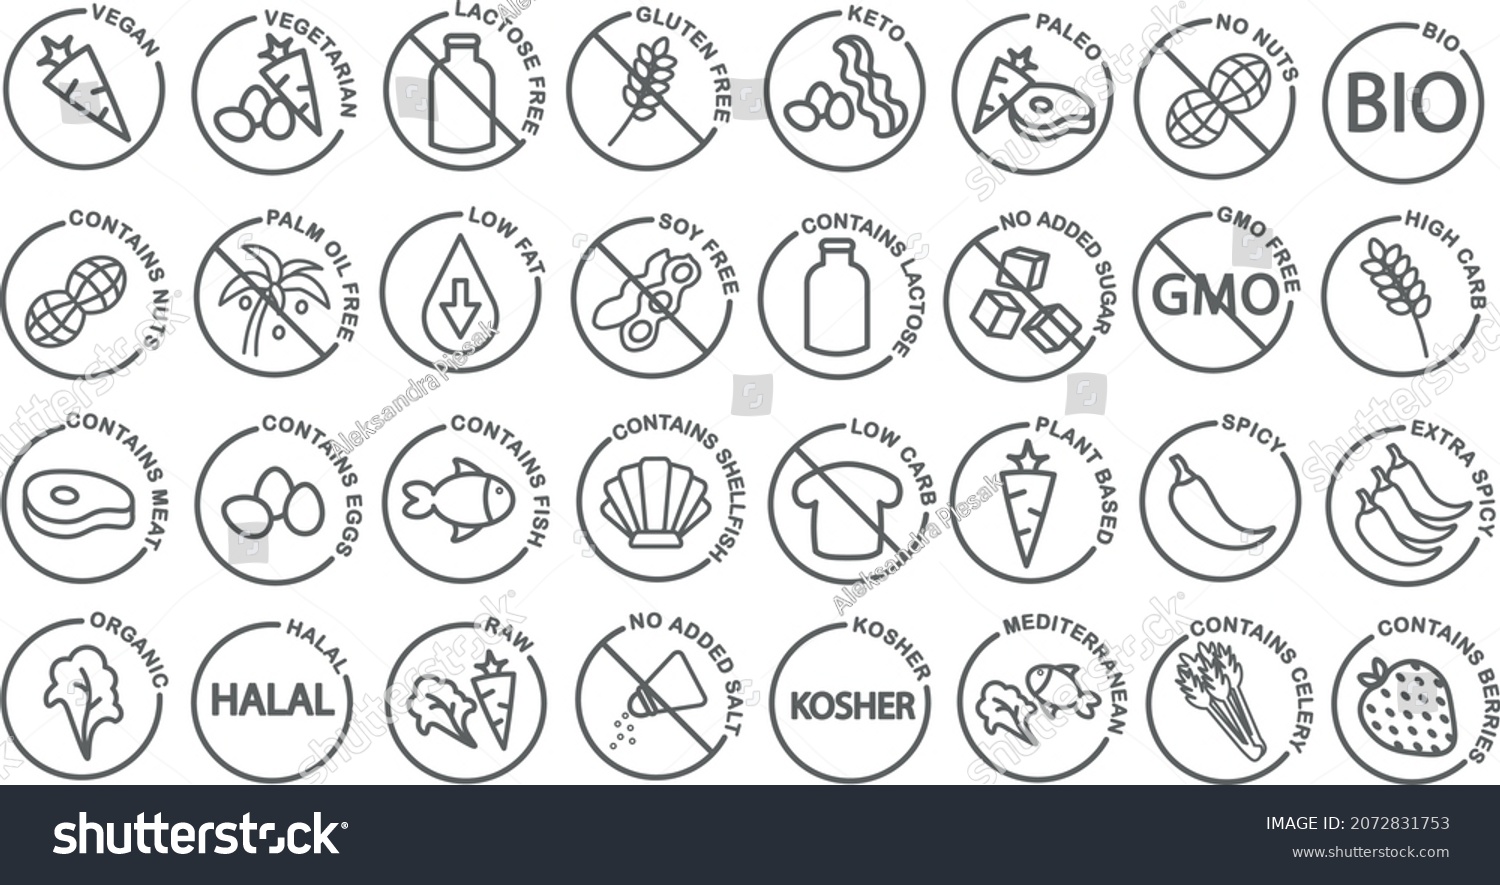 SVG of A set of editable icons related to diets such as keto, vegan, vegetarian, plant based, paleo, dietary restrictions, allergens, spiciness, ketogenic, low fat, high carb, no added sugar etc. svg